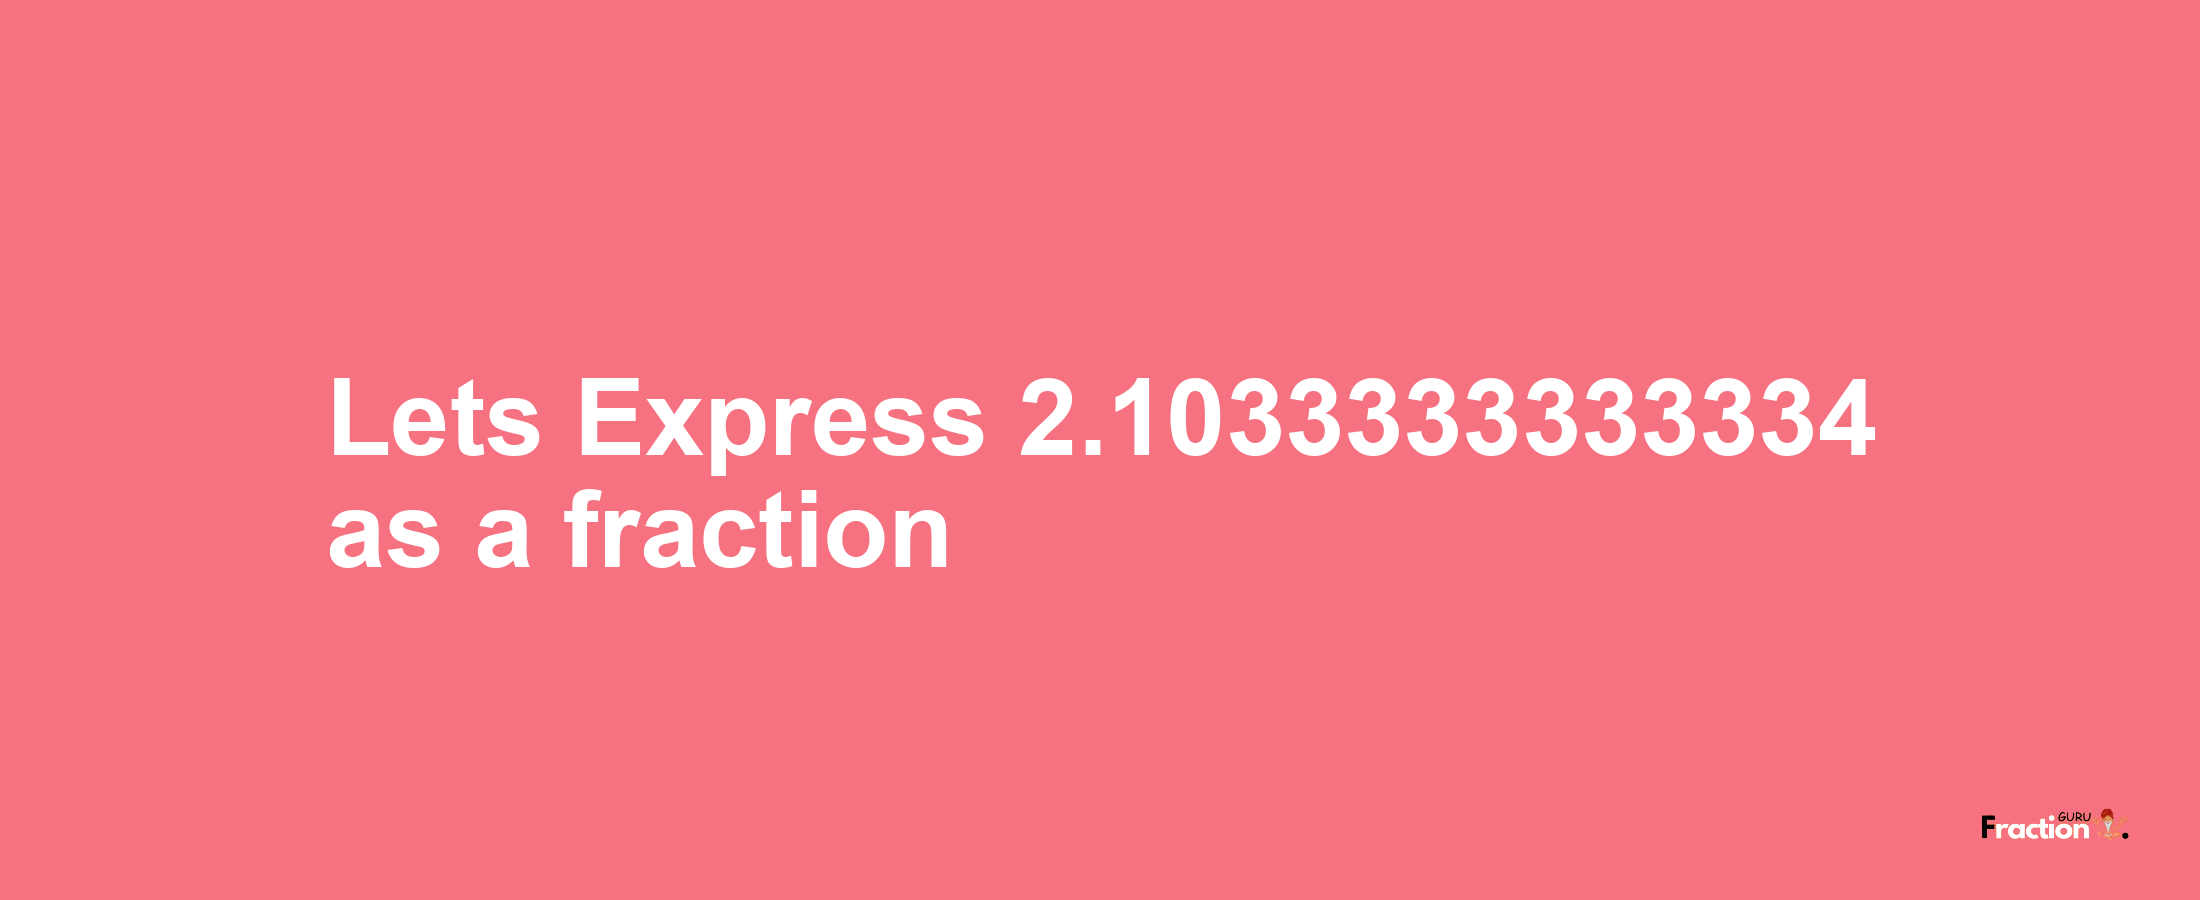 Lets Express 2.1033333333334 as afraction